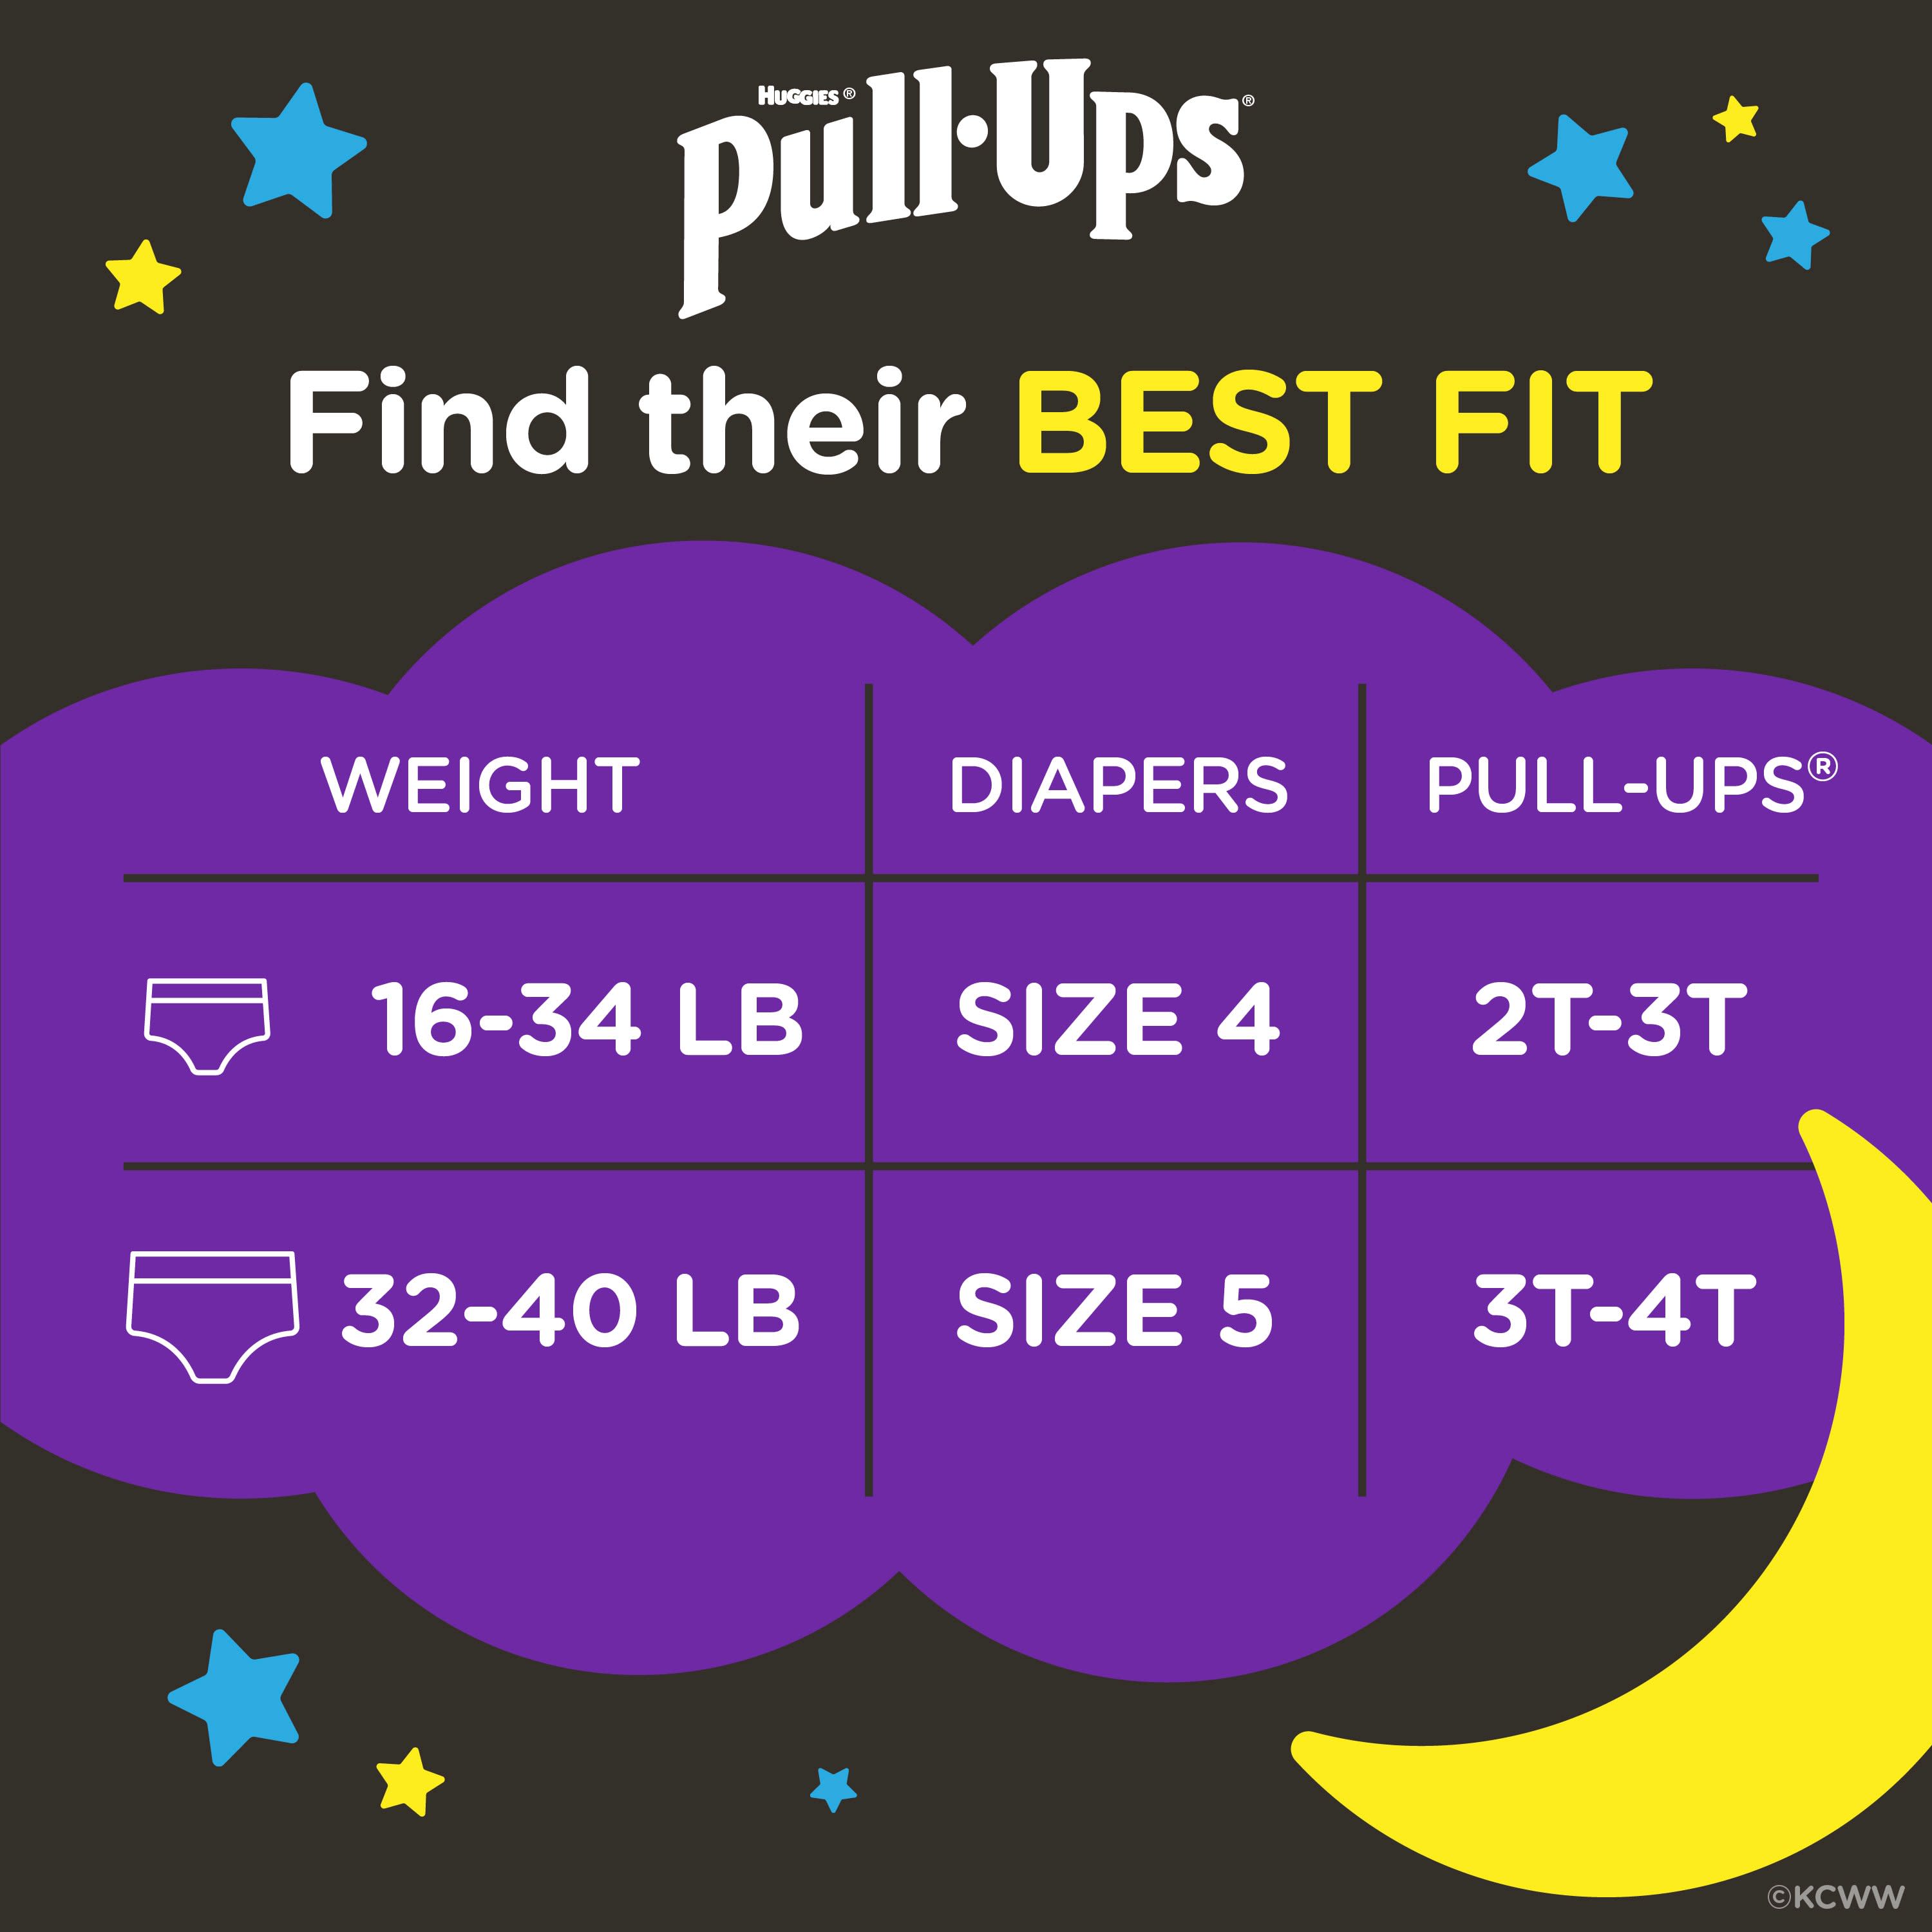 Pull-Ups Boys' Night-Time Training Pants, 3T-4T (32-40 lbs), 60 Ct (Select for More Options) - image 4 of 12